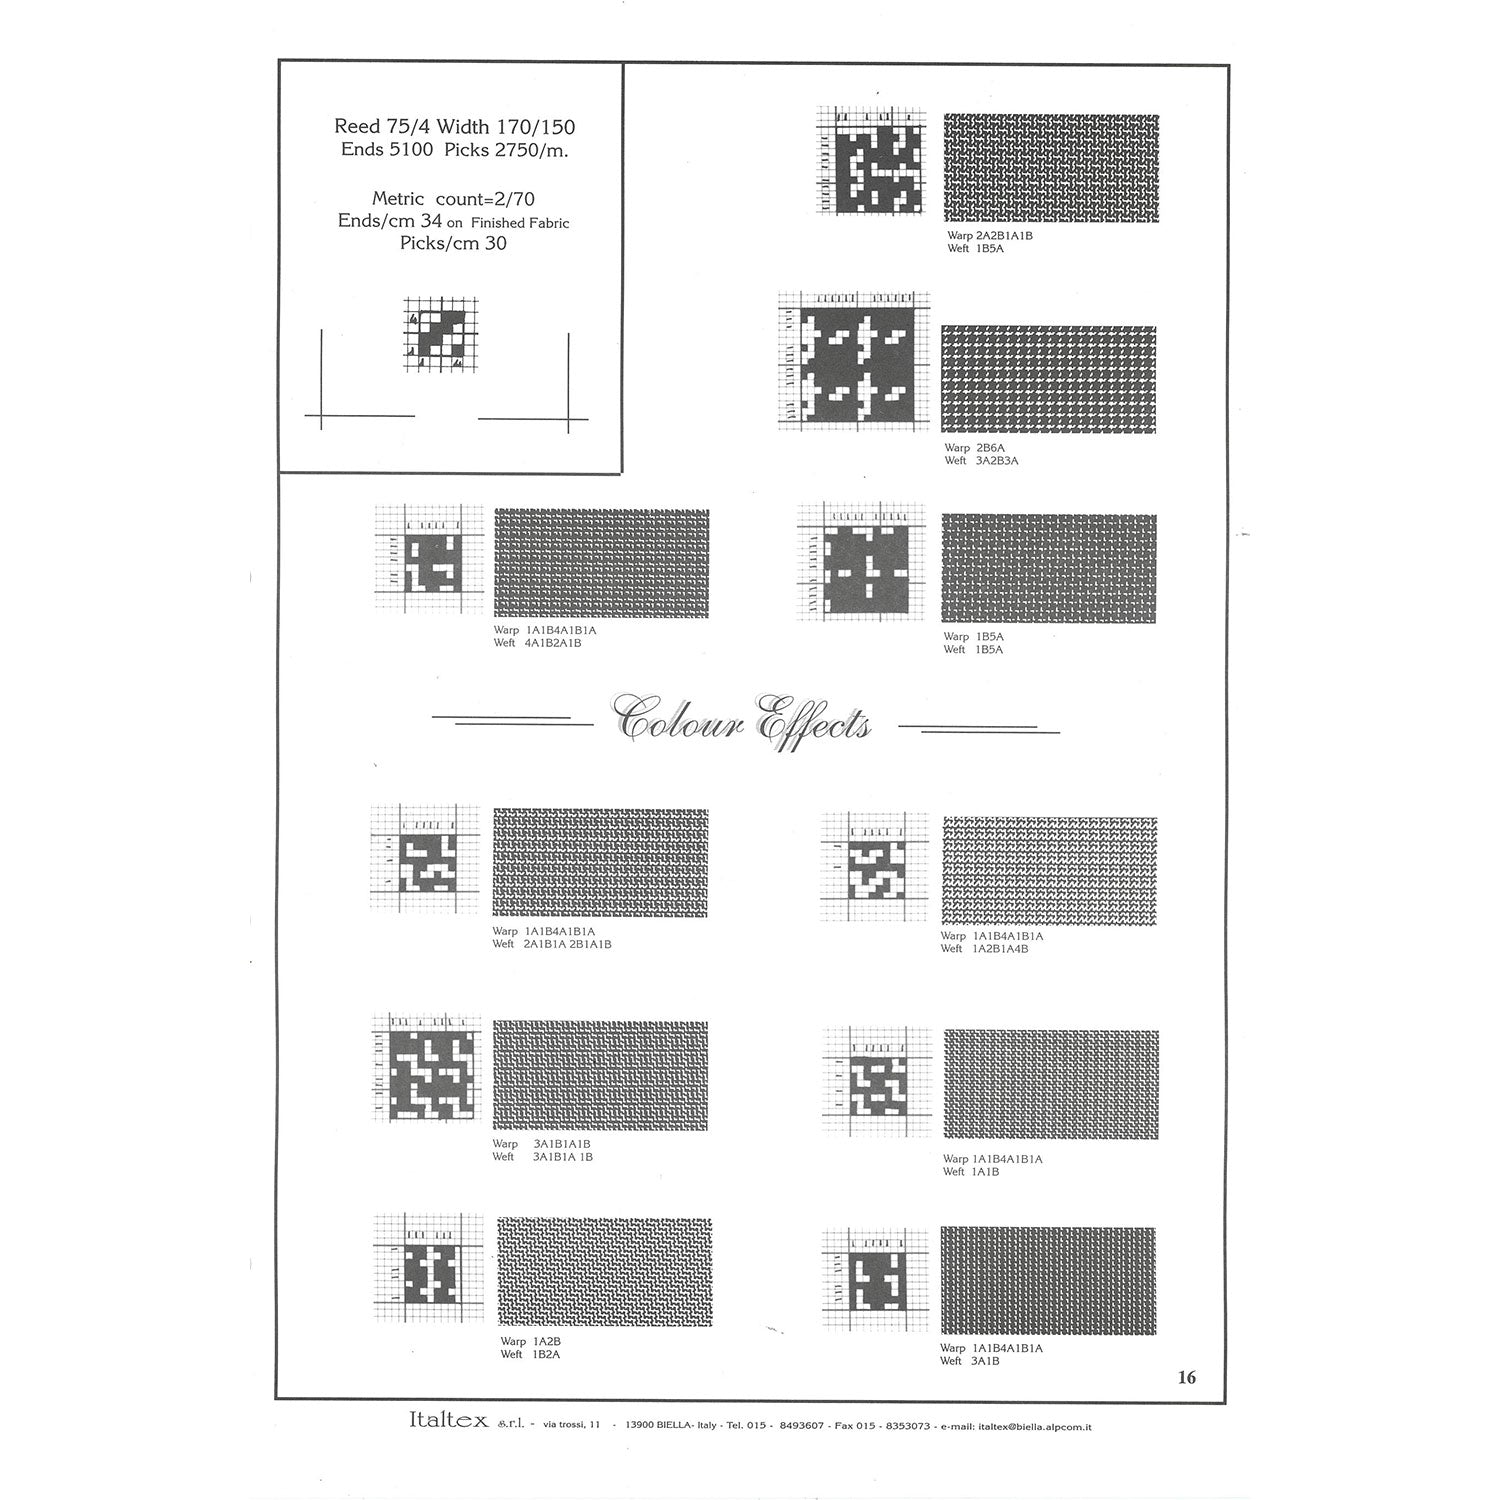 Ten colour effects for fabric construction with weaves, warp and weft notes, reeds, ends and picks per meter, yarn's metric count presented in black and white